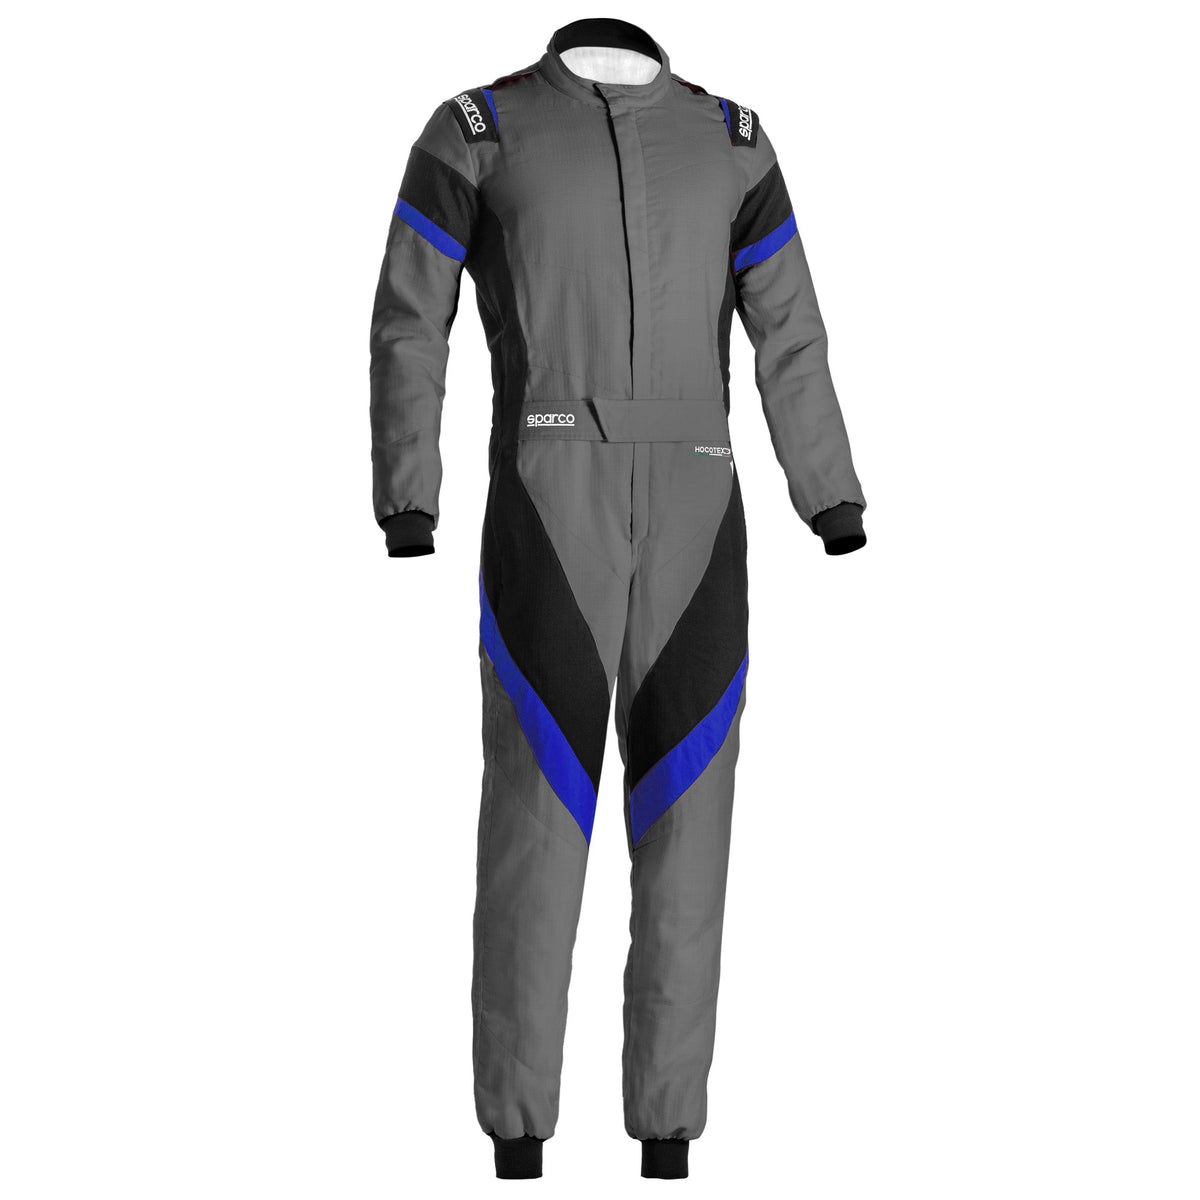 Sparco Victory 2.0 Racing Suit - Grey/Blue